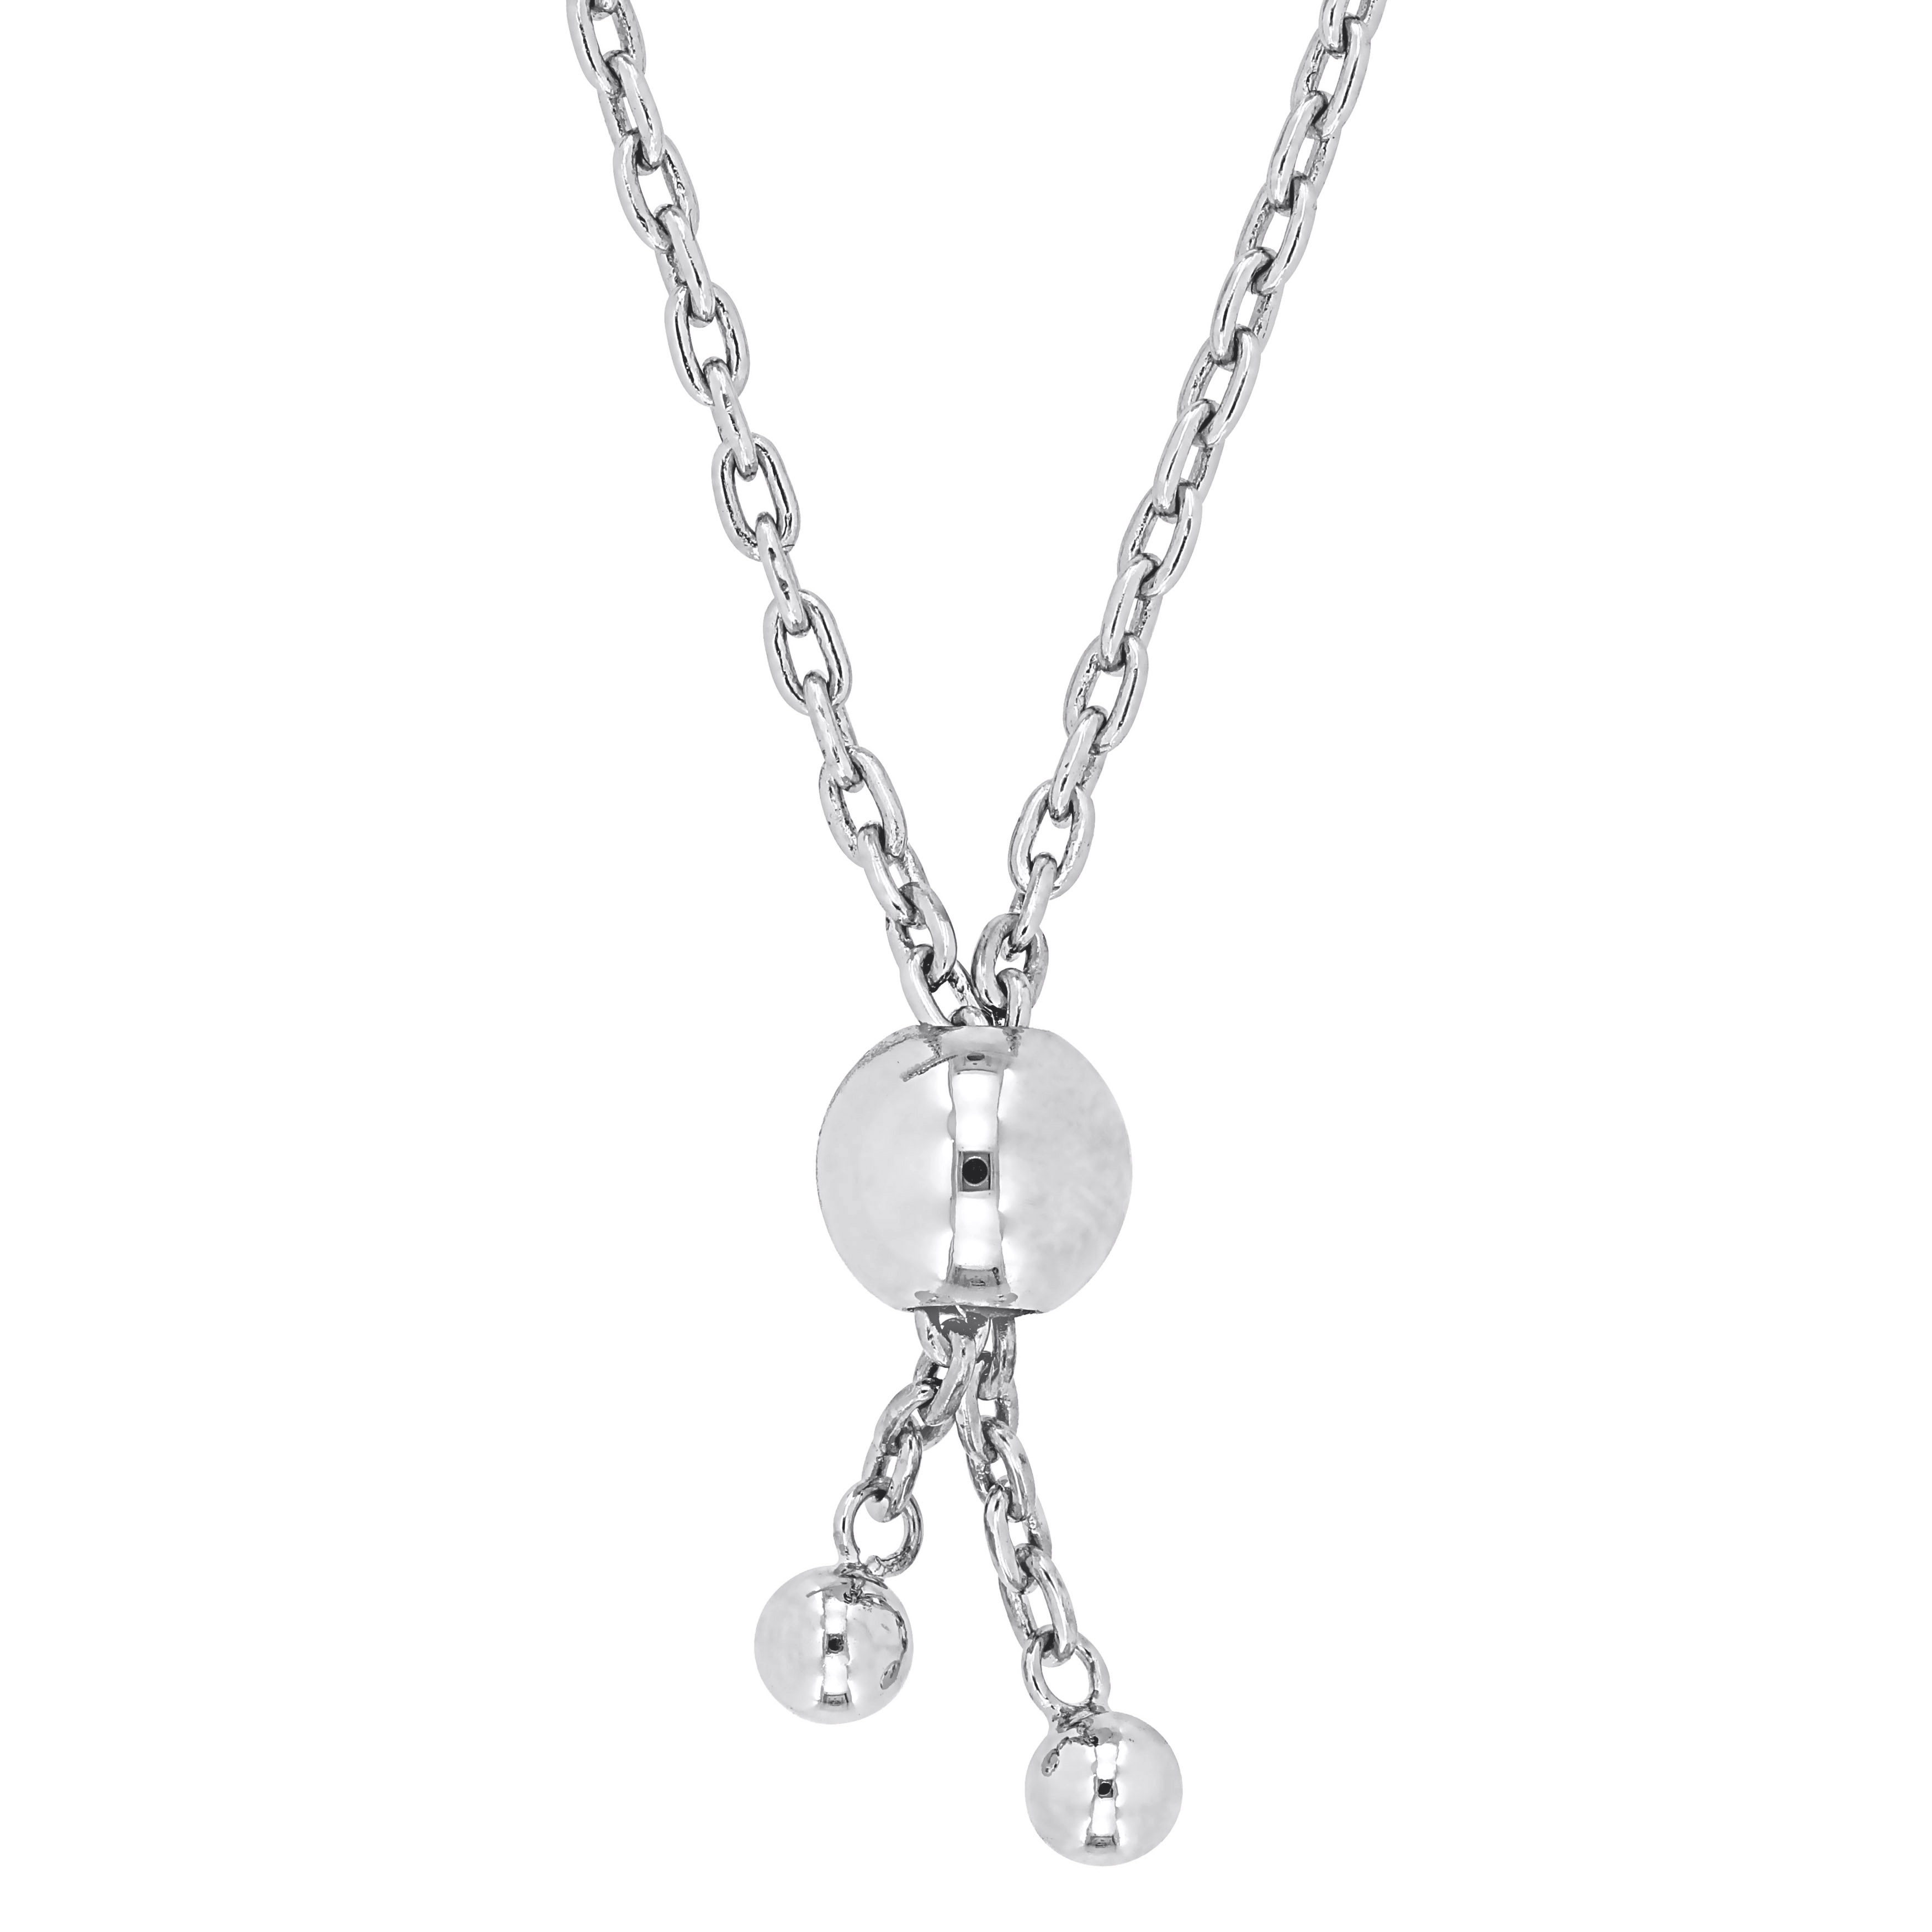 1/2 CT DEW Created Moissanite S link Adjustable Bolo Bracelet in Sterling Silver - 5-10 in.